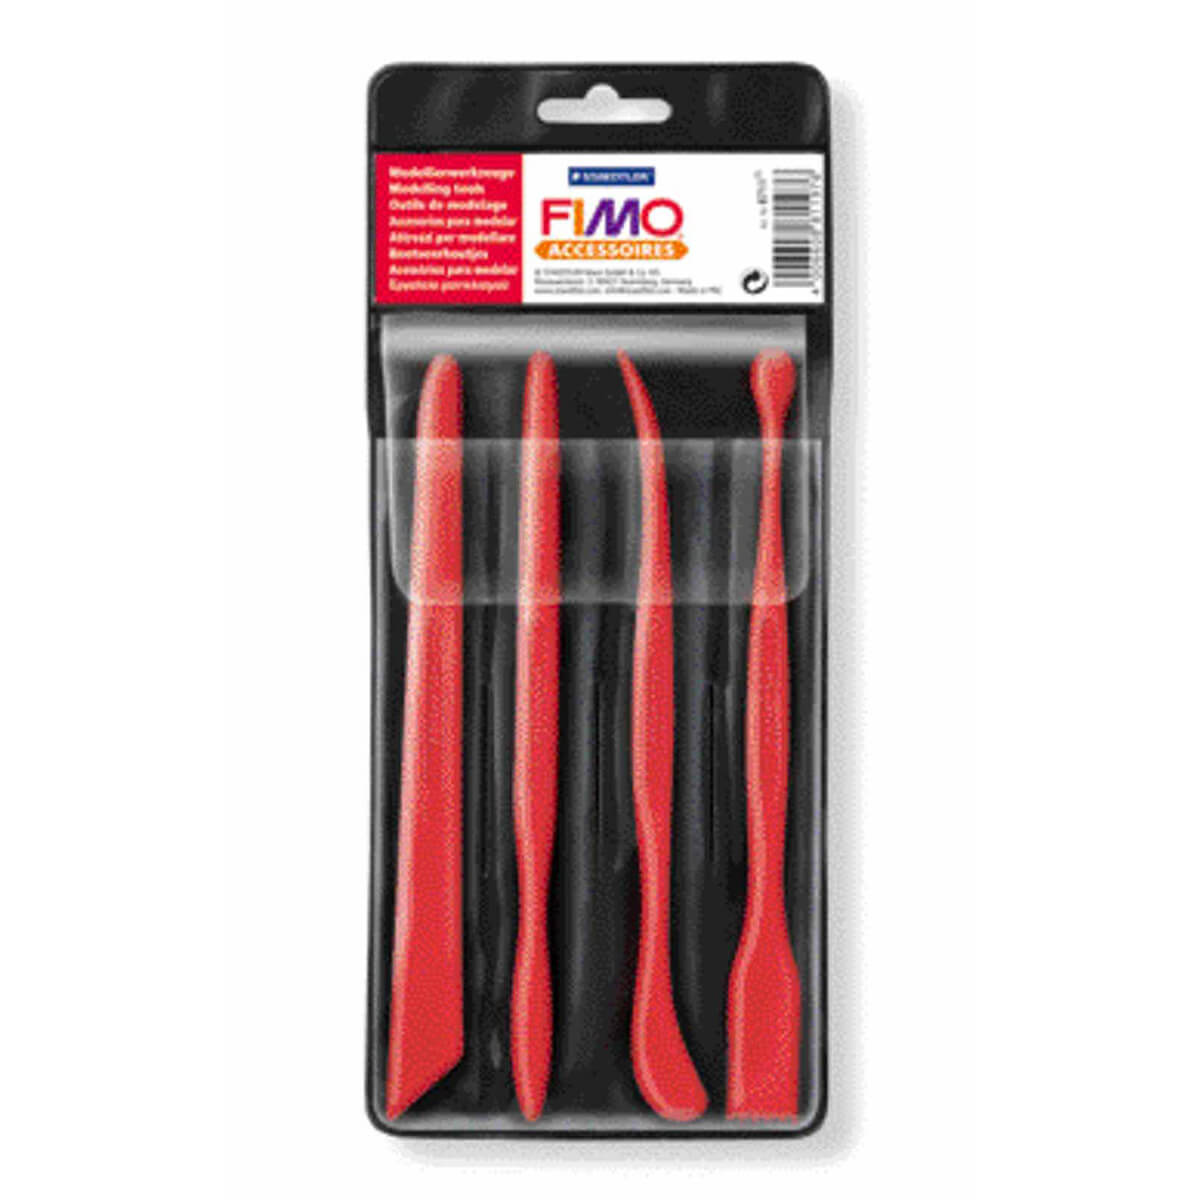 STAEDTLER FIMO Accessories Modelling Tools